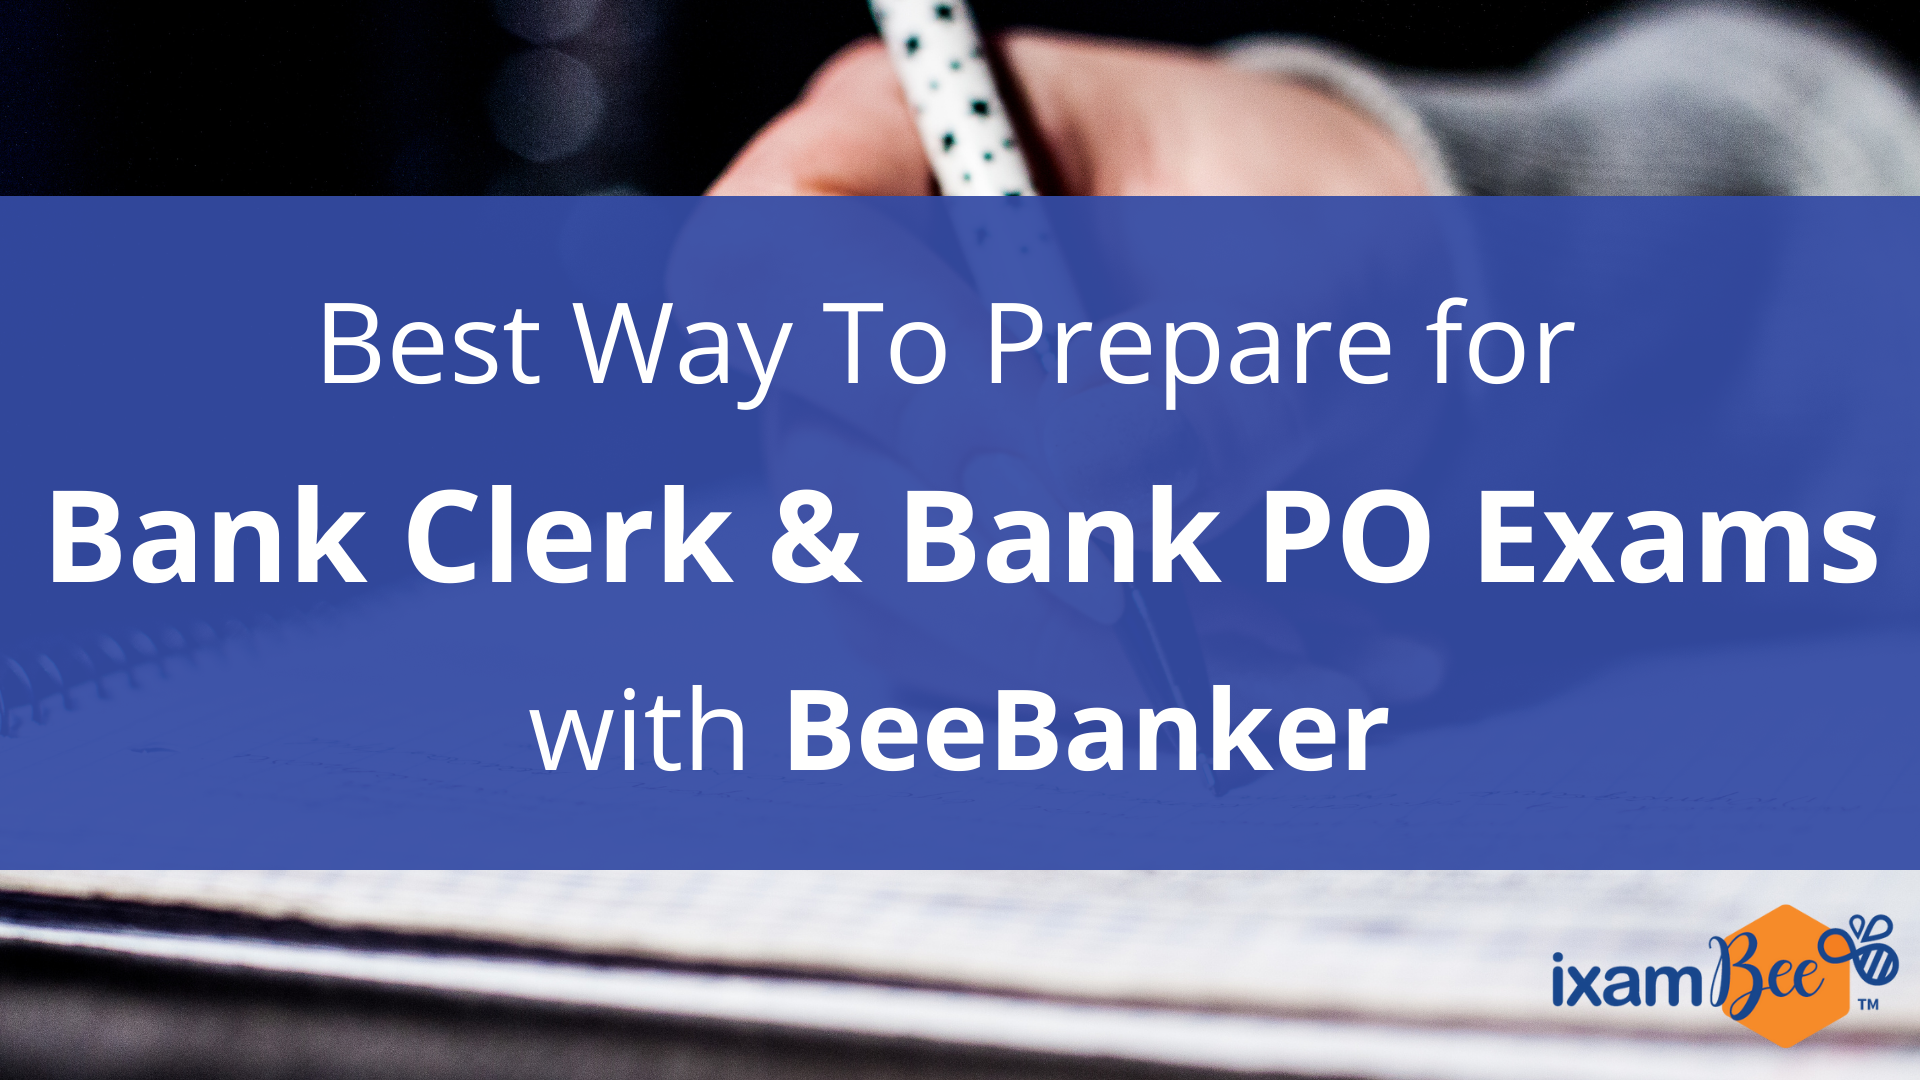 Upcoming Bank Exams 2022: Best Way To Prepare for Bank Clerk and PO Posts